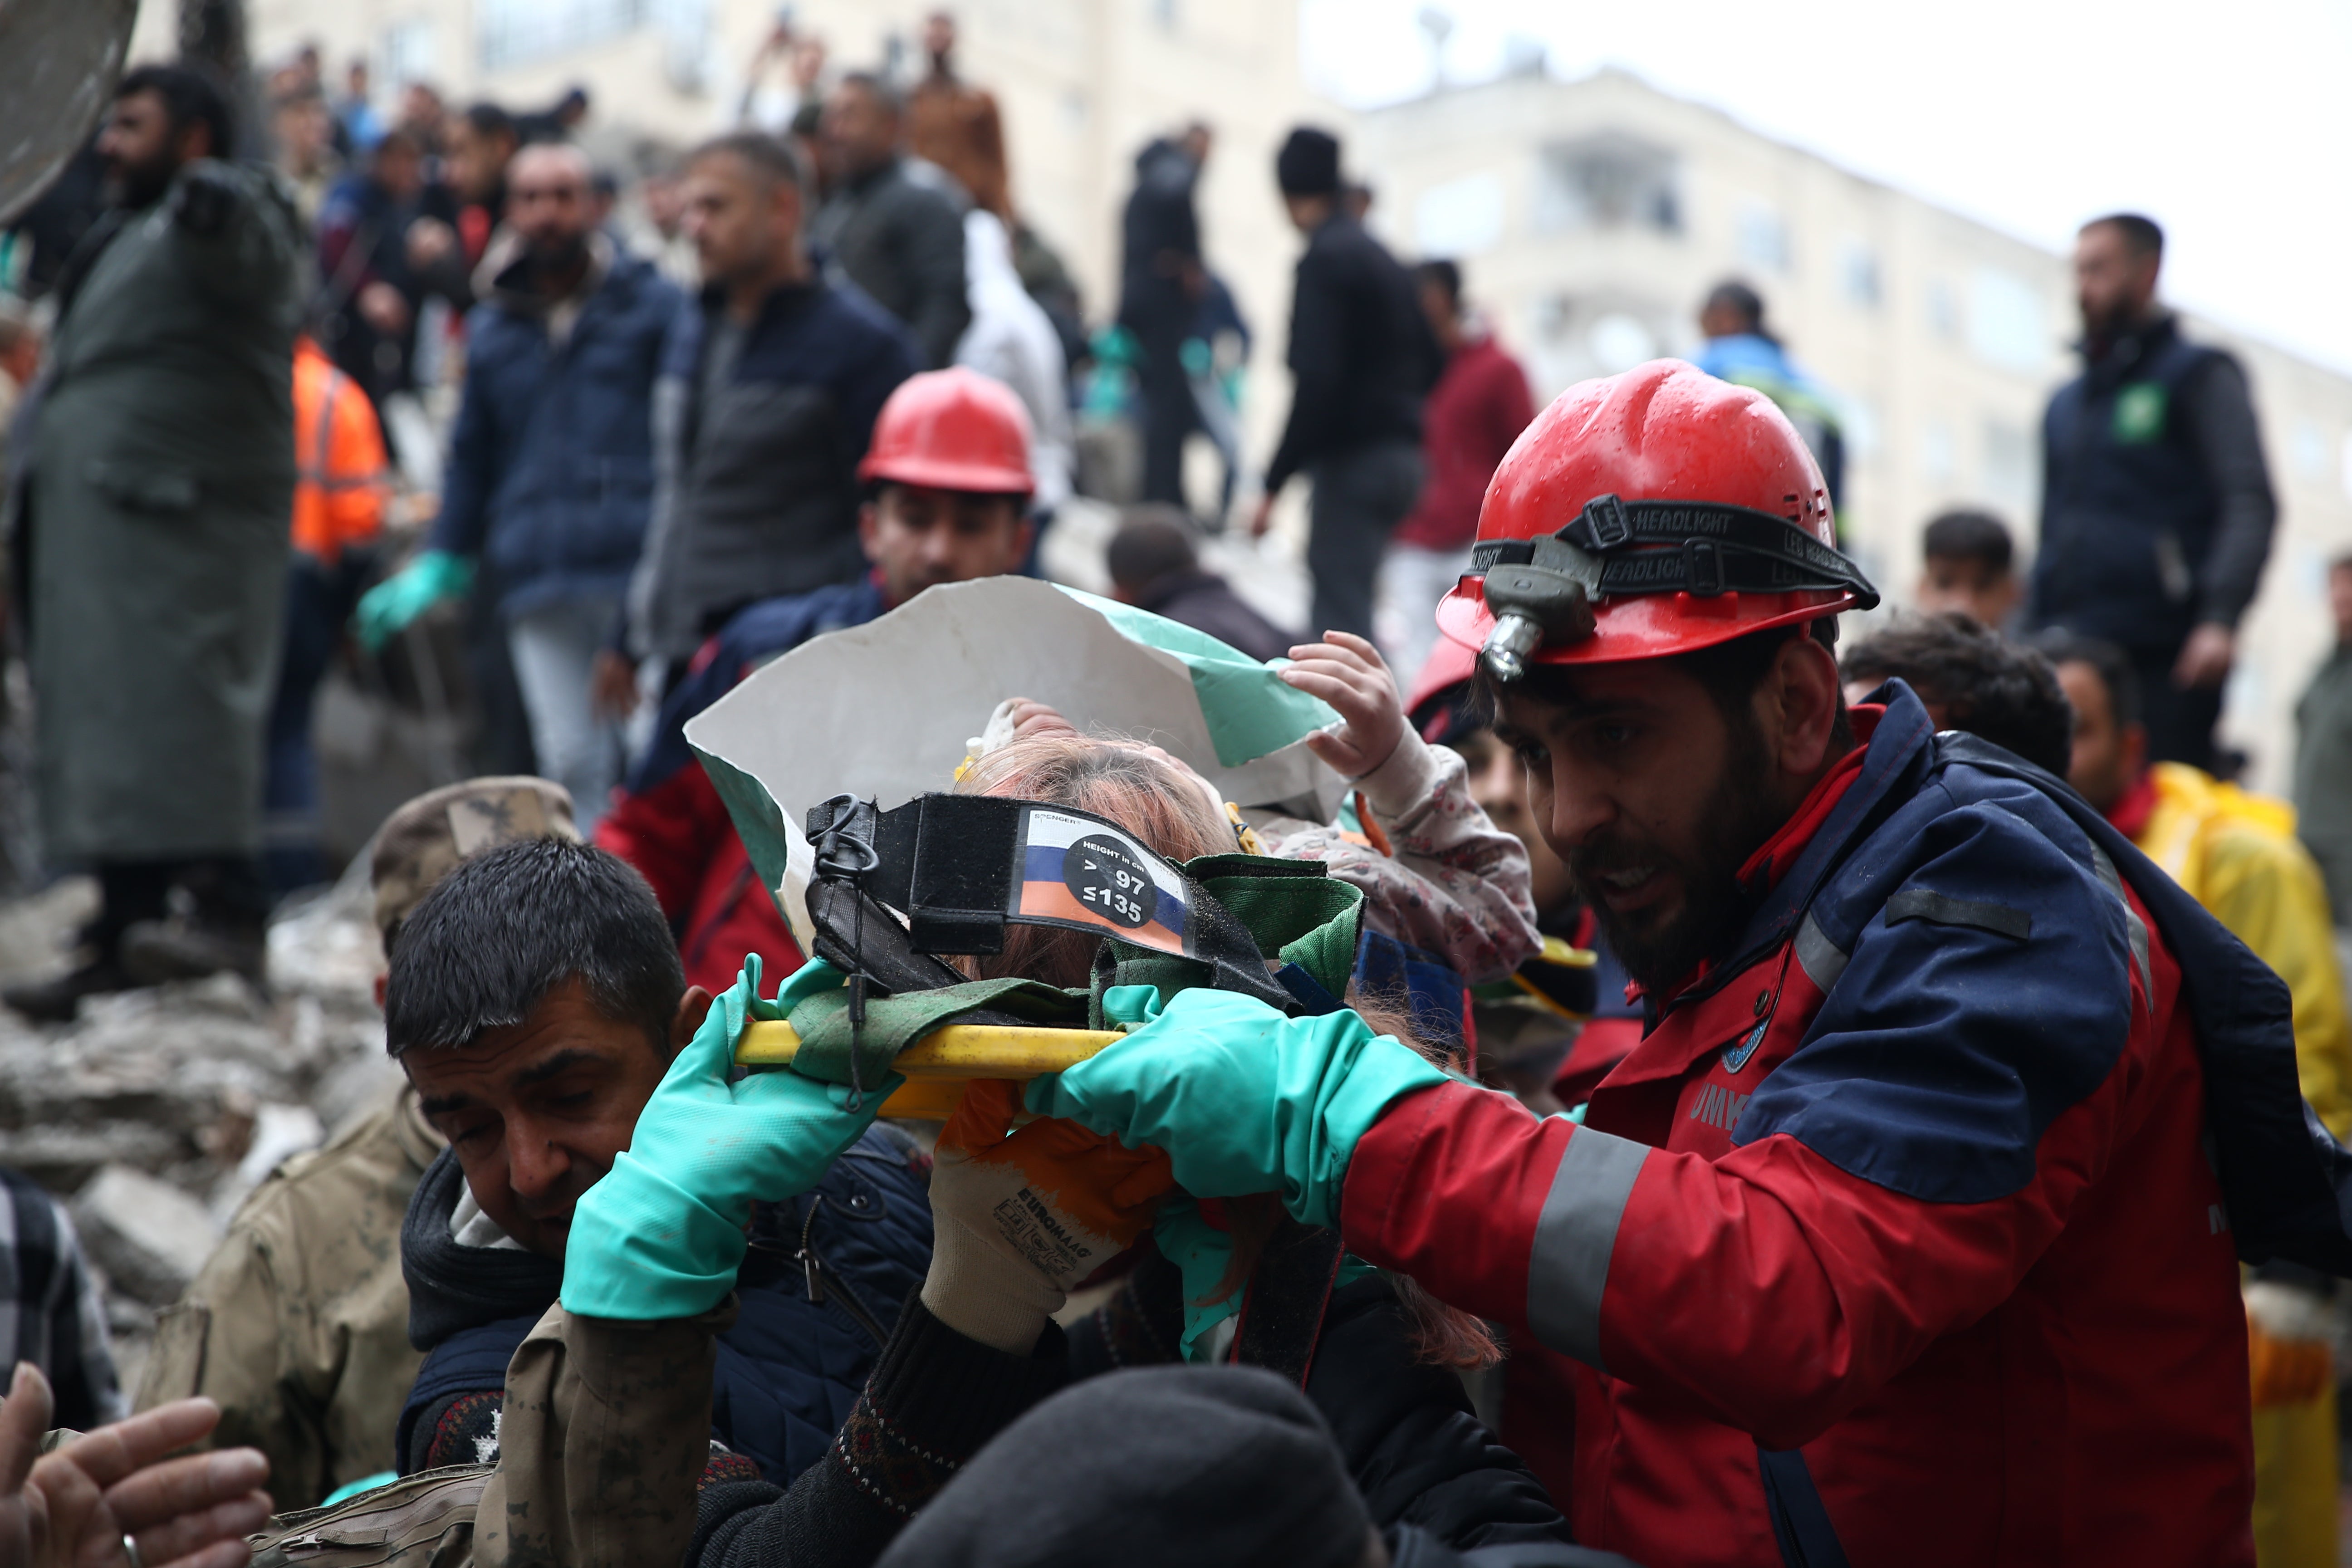 A 10-year-old rescued from the rubble of the Turkey earthquake